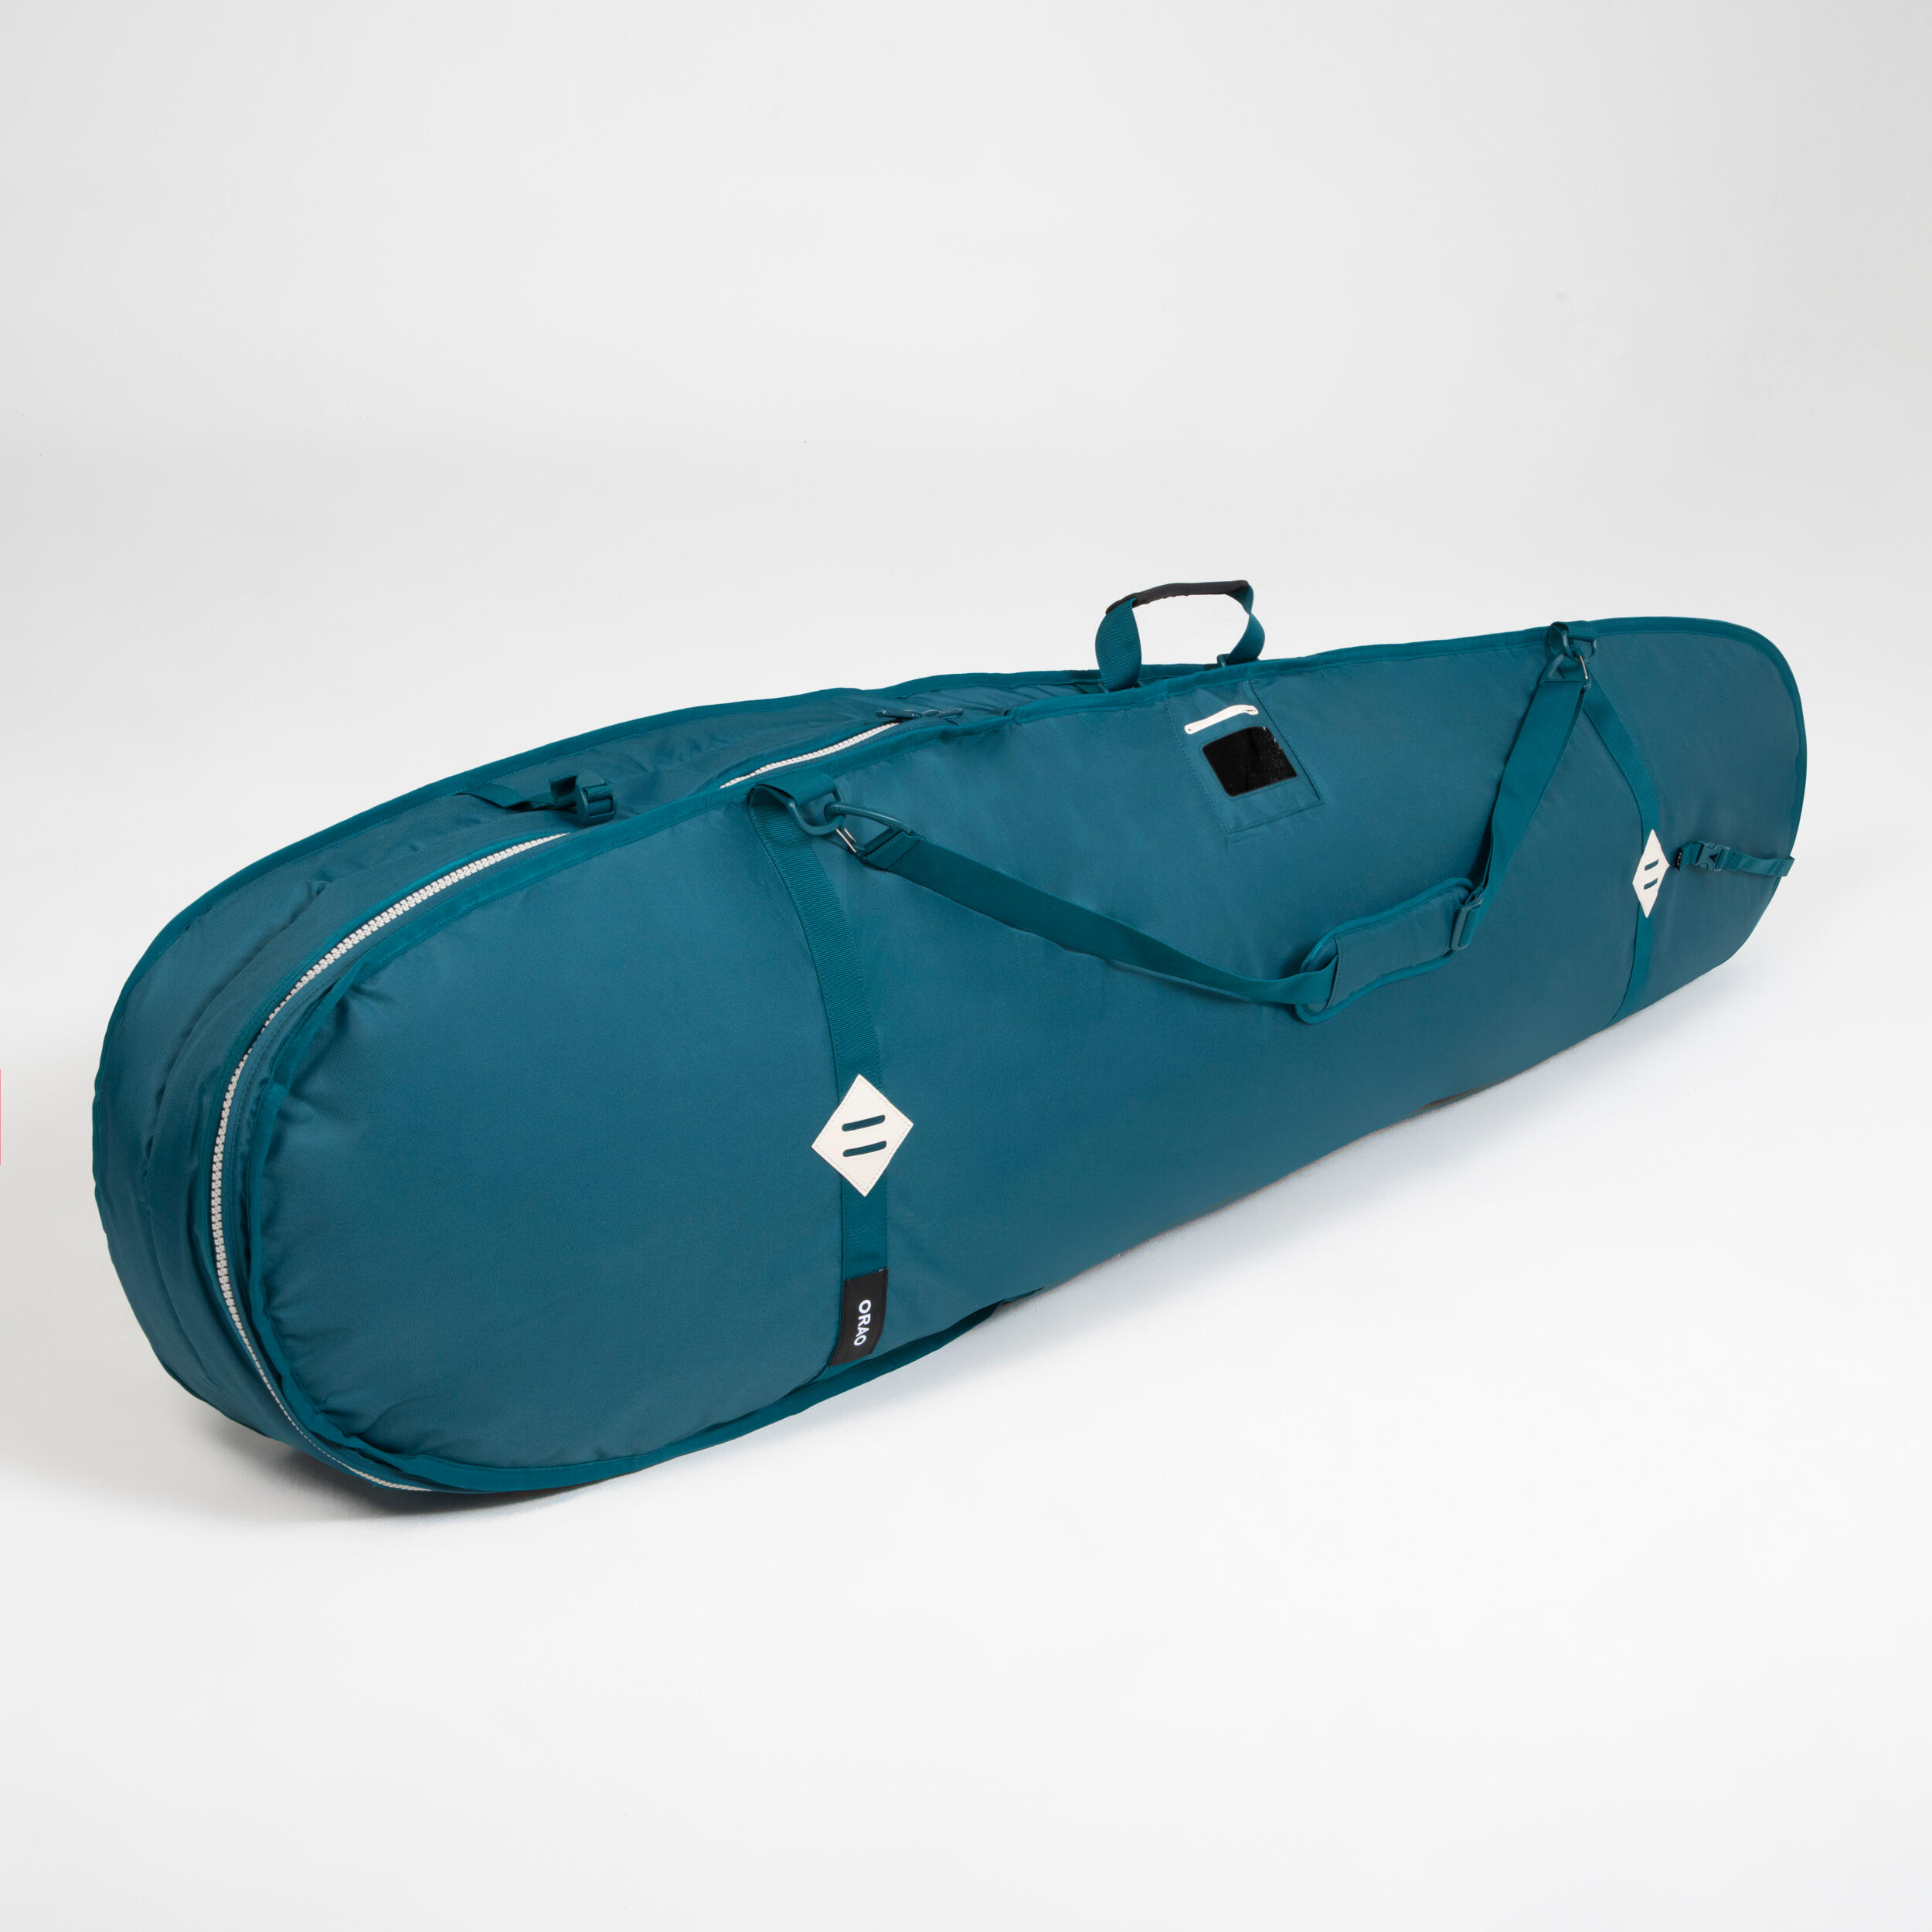 KITE-SURFING PROTECTIVE COVER - 6' 1/9